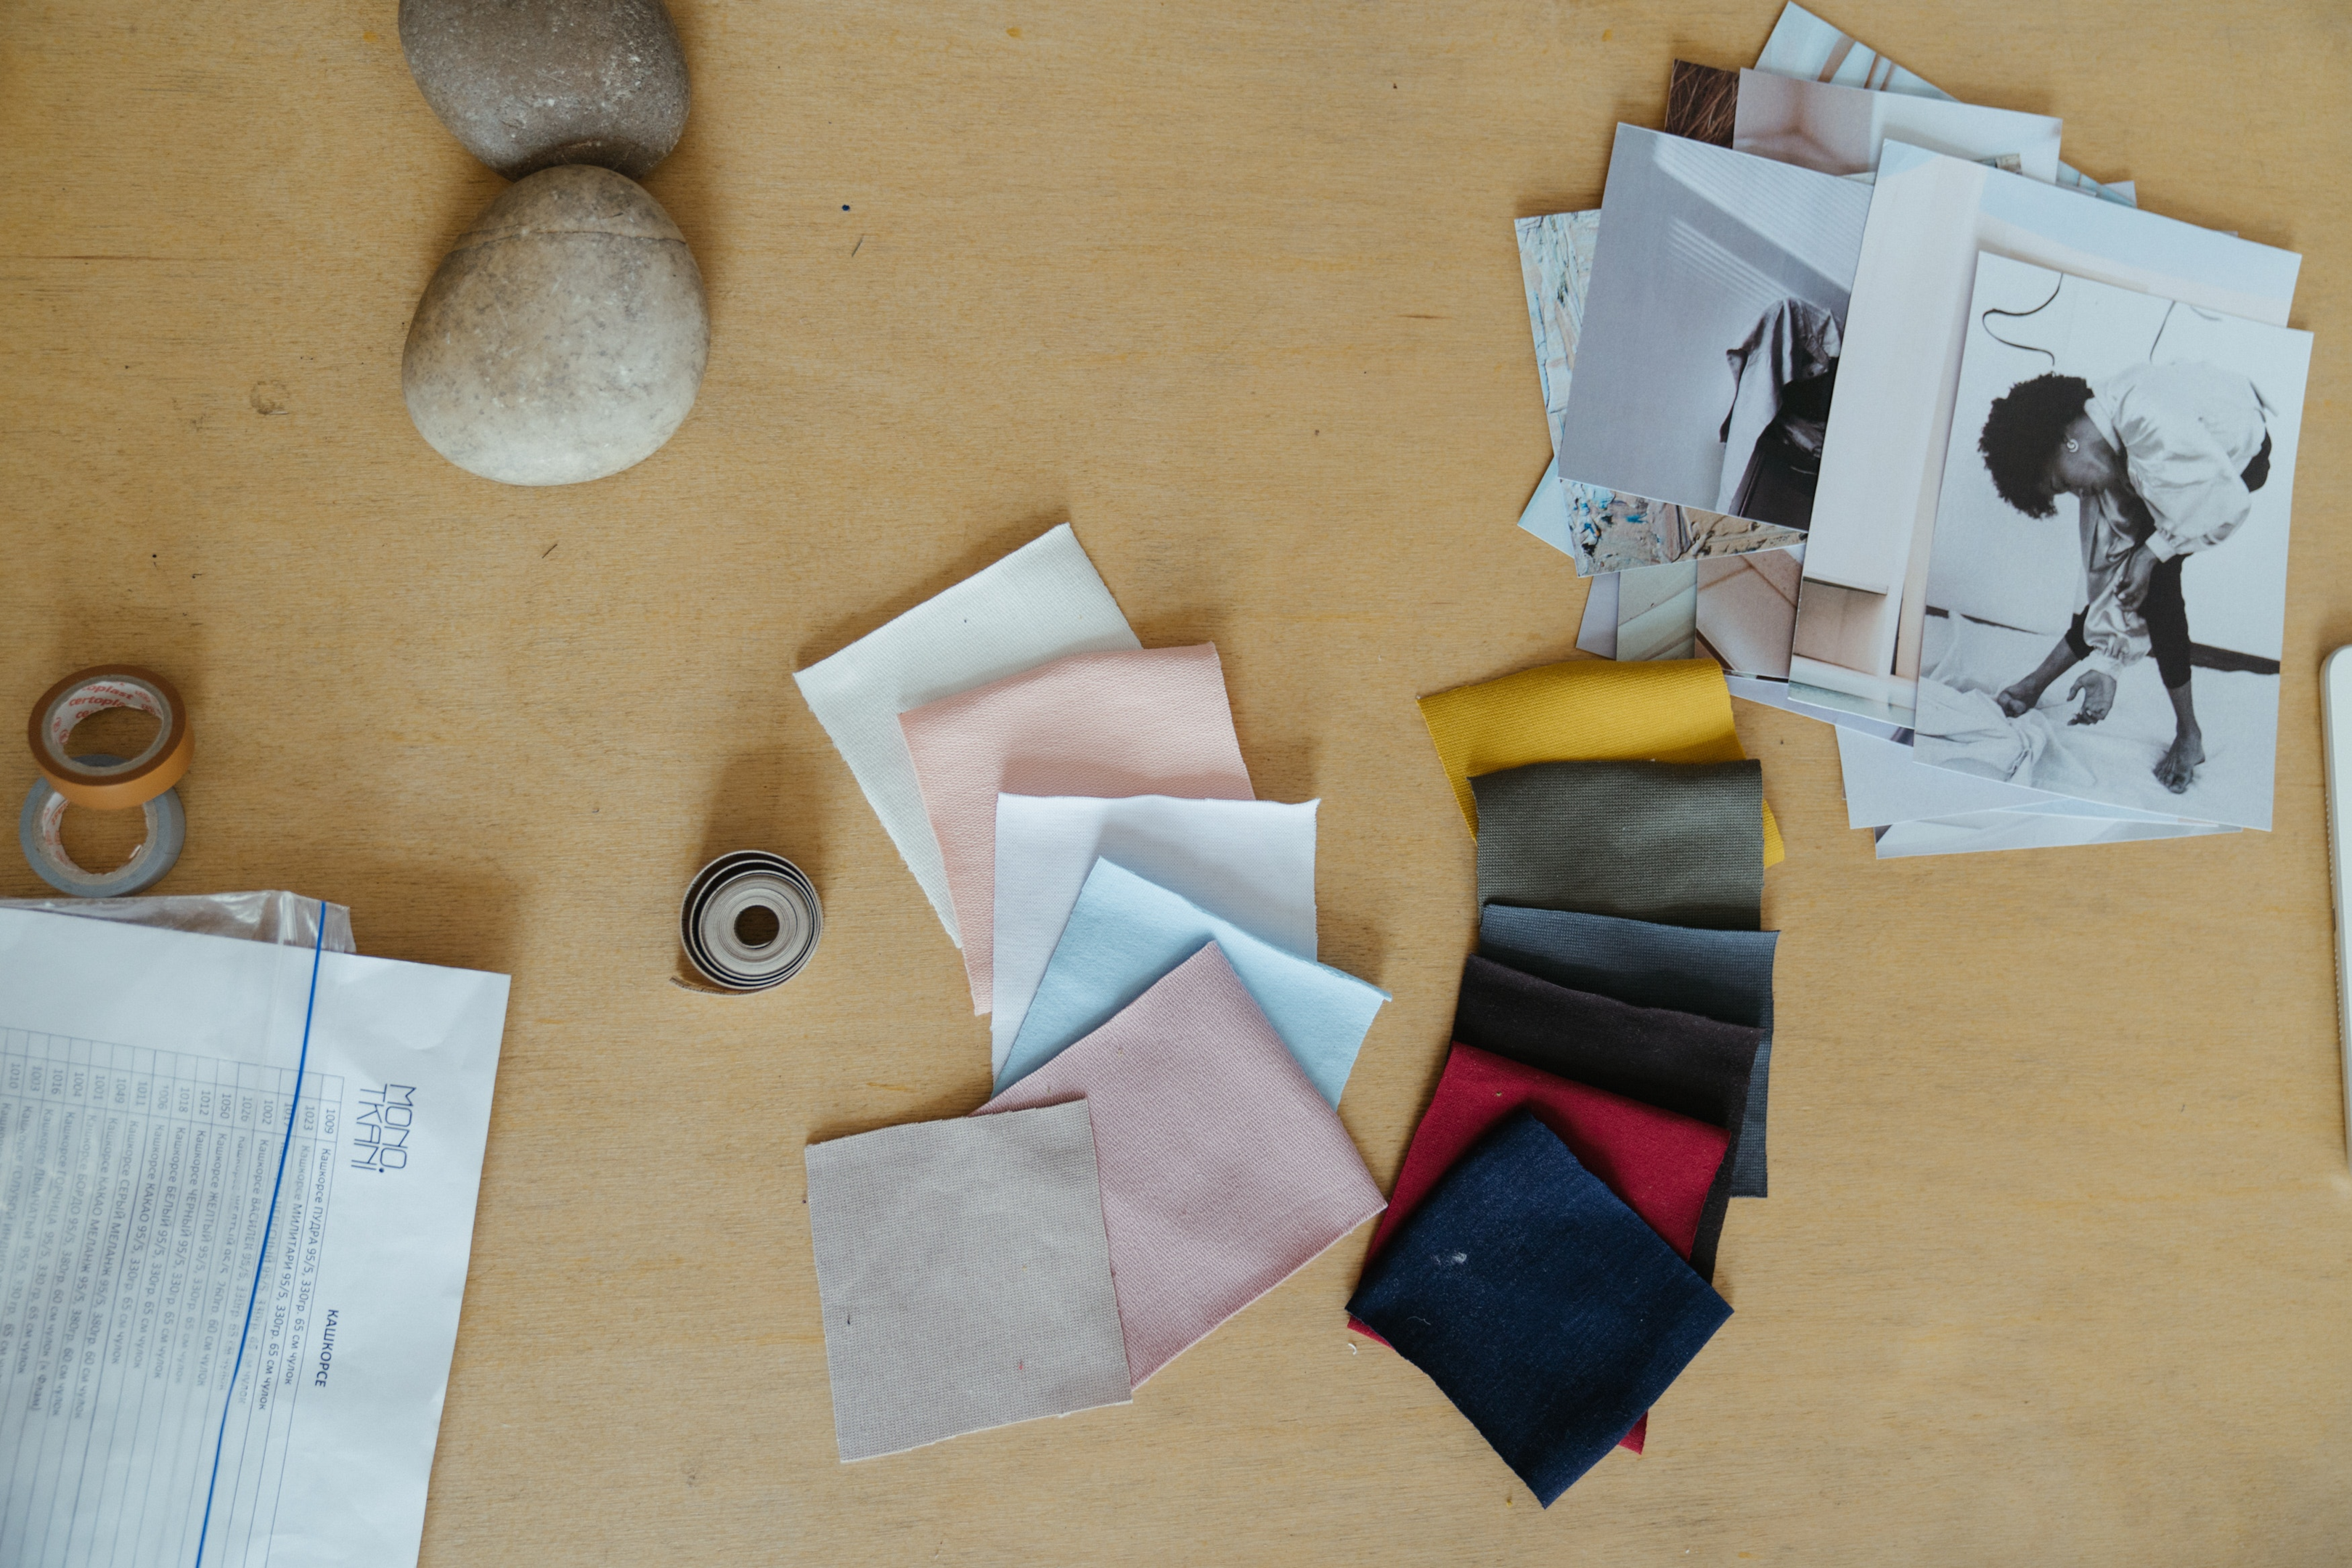 Fabric sourcing from different companies.